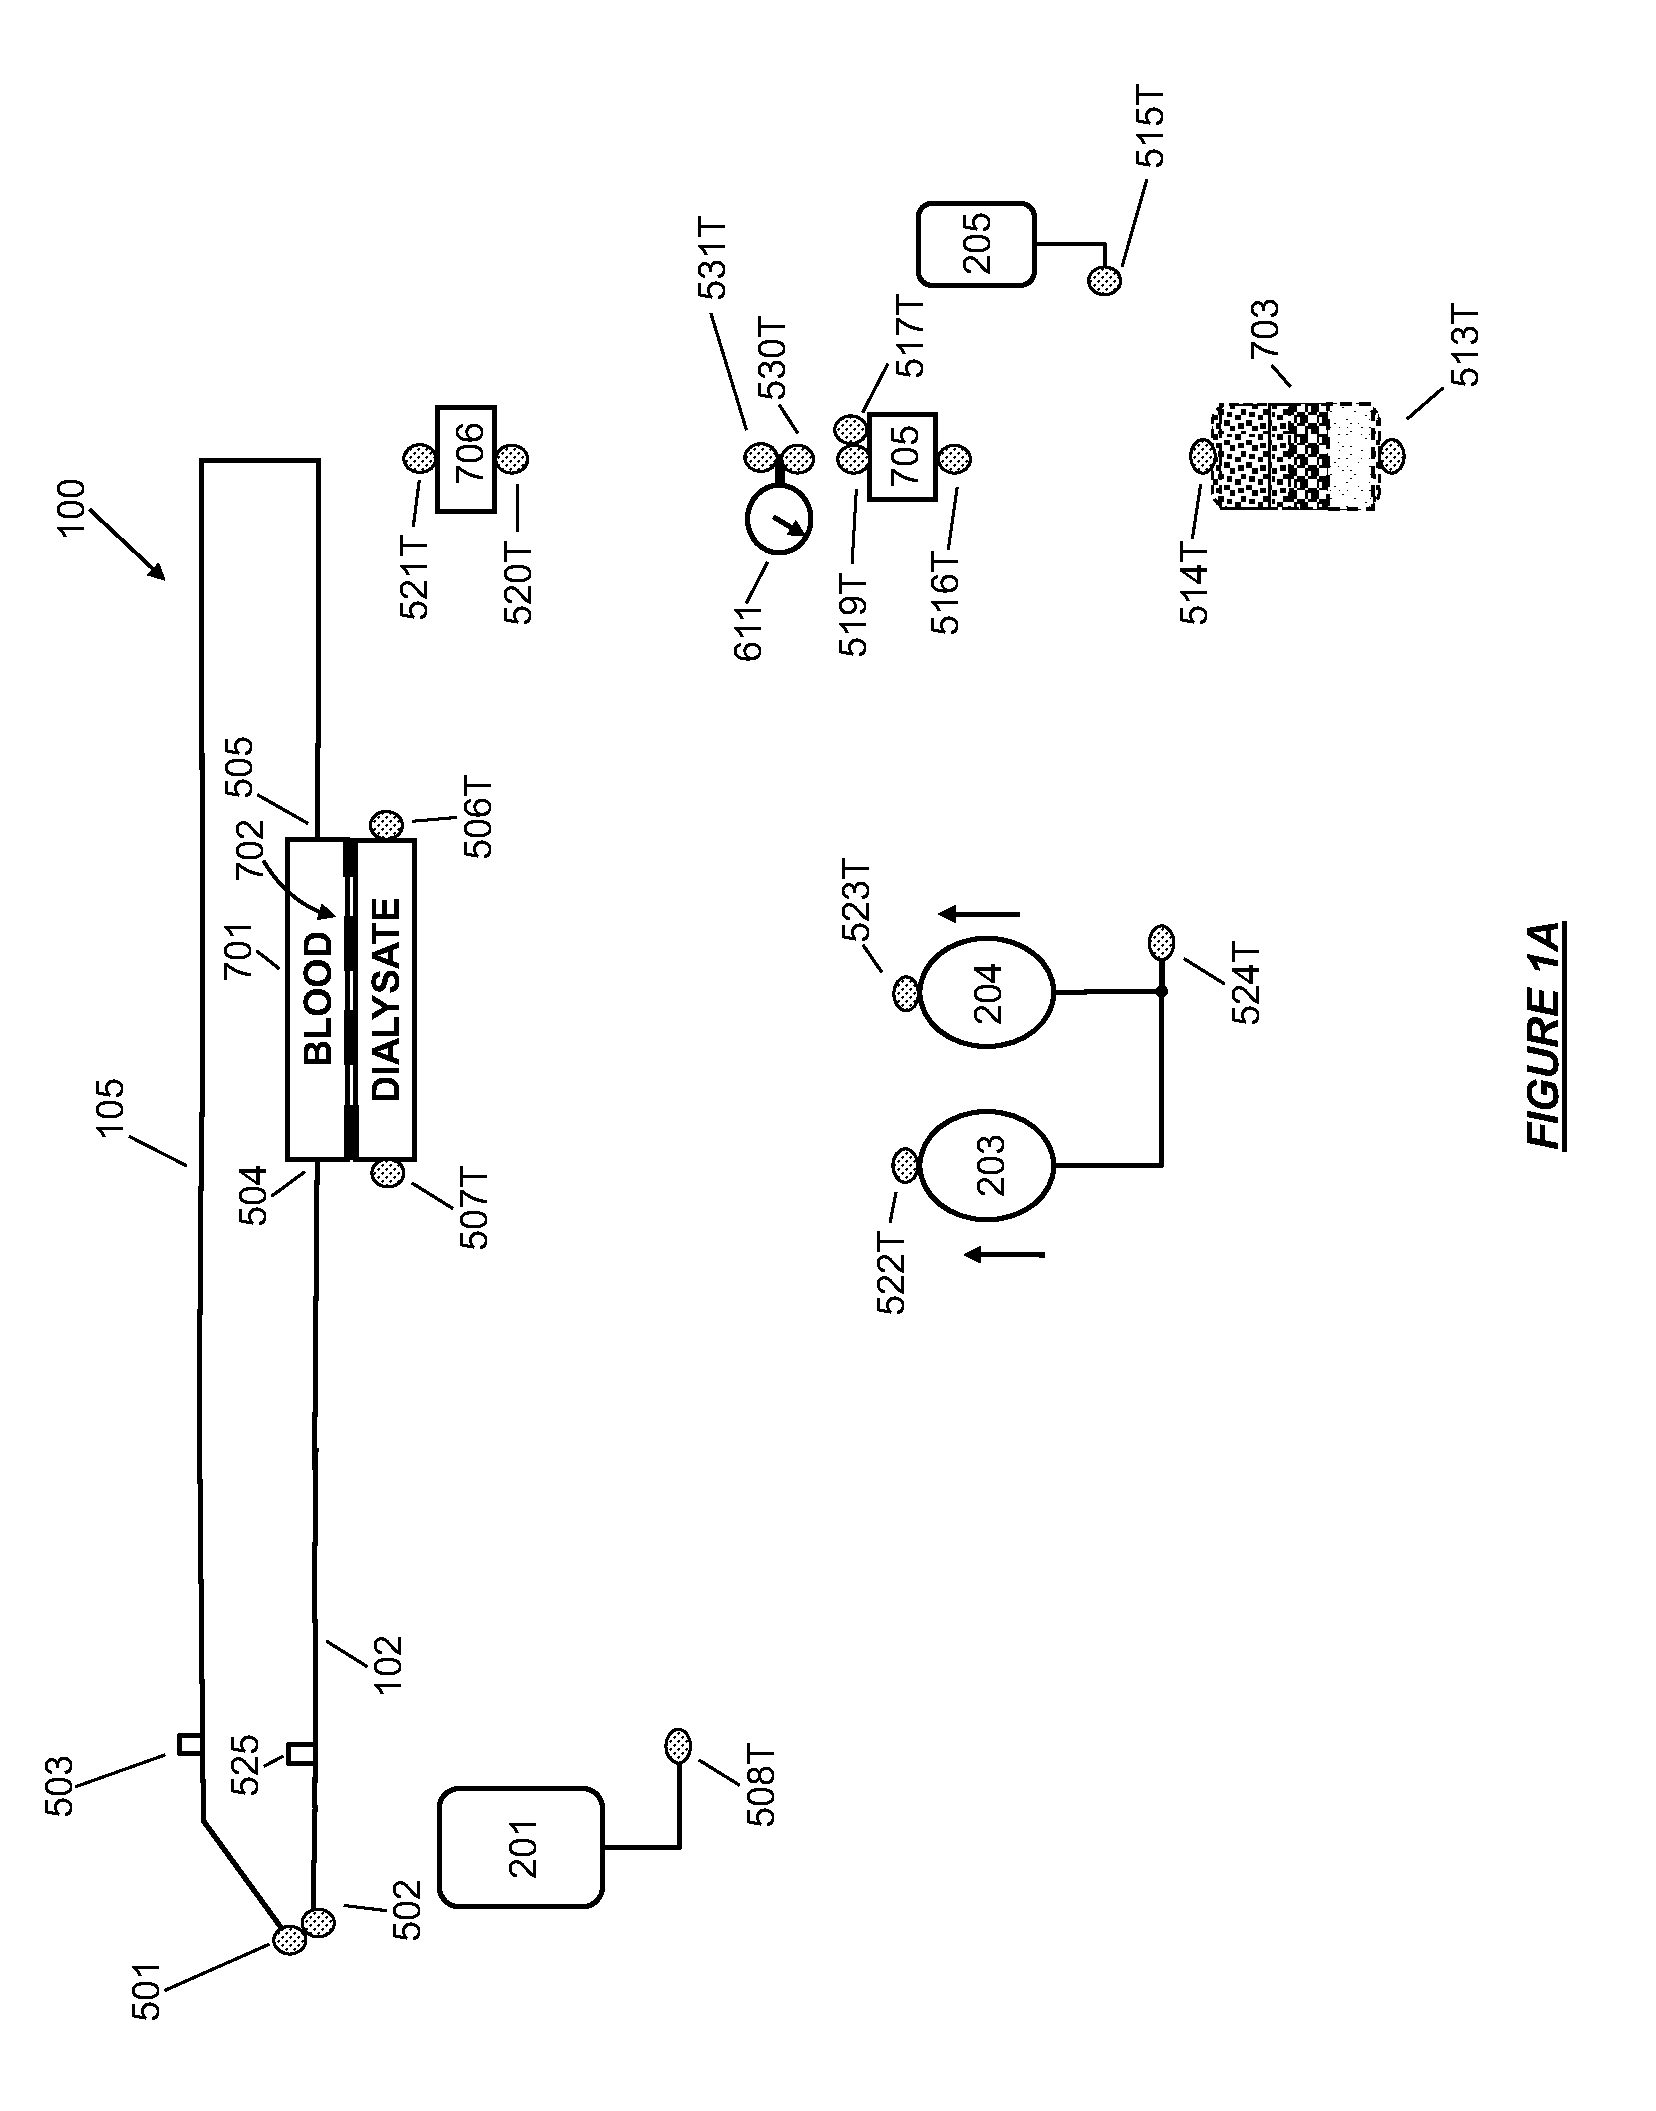 Sodium and buffer source cartridges for use in a modular controlled compliant flow path